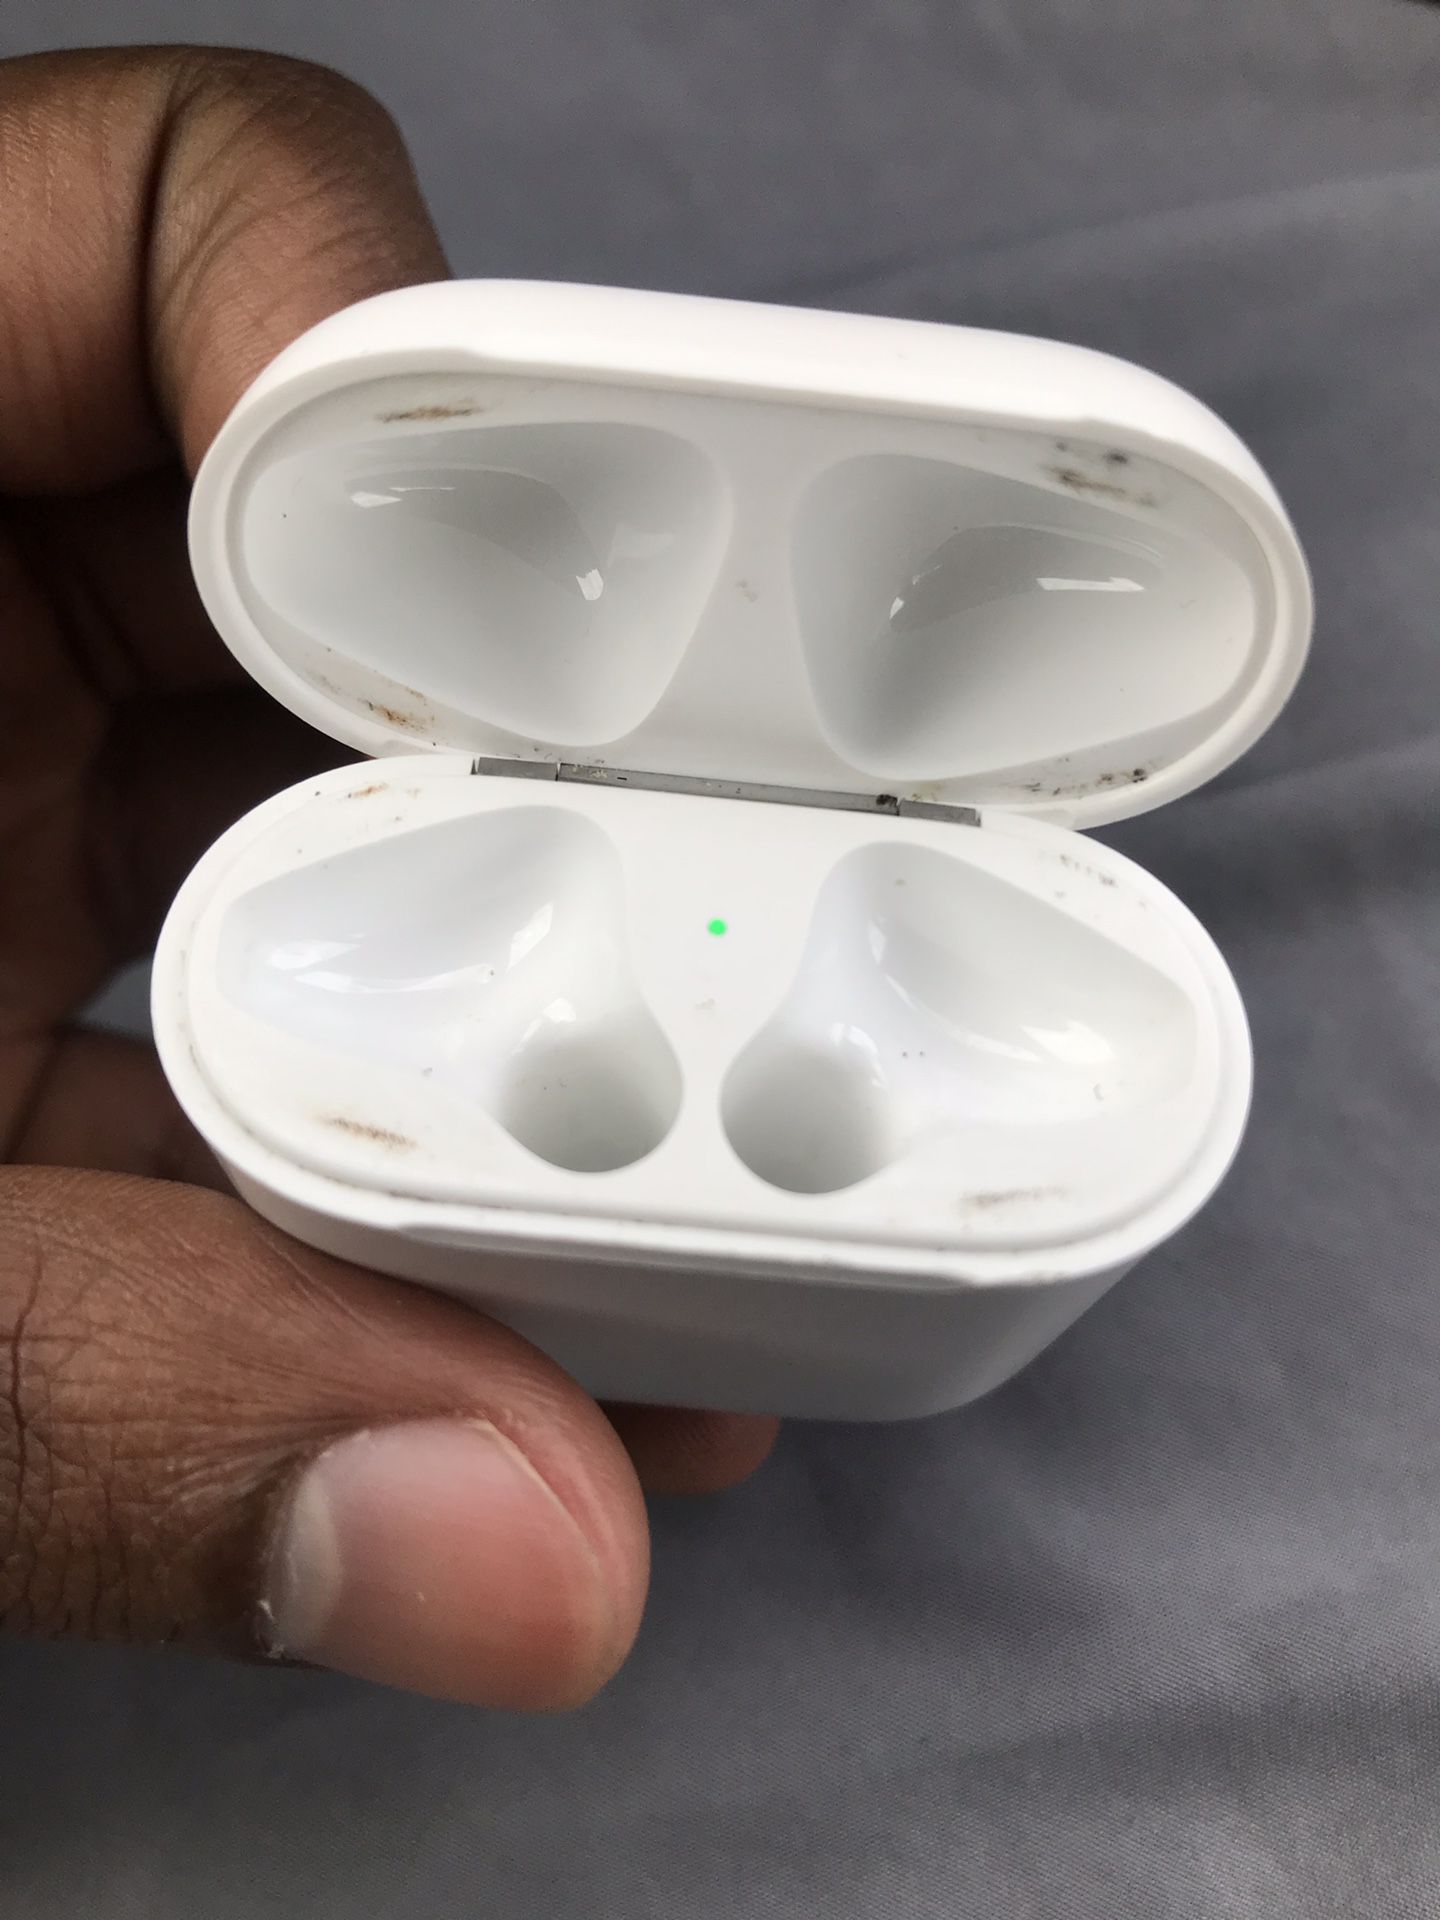 Apple AirPods Case